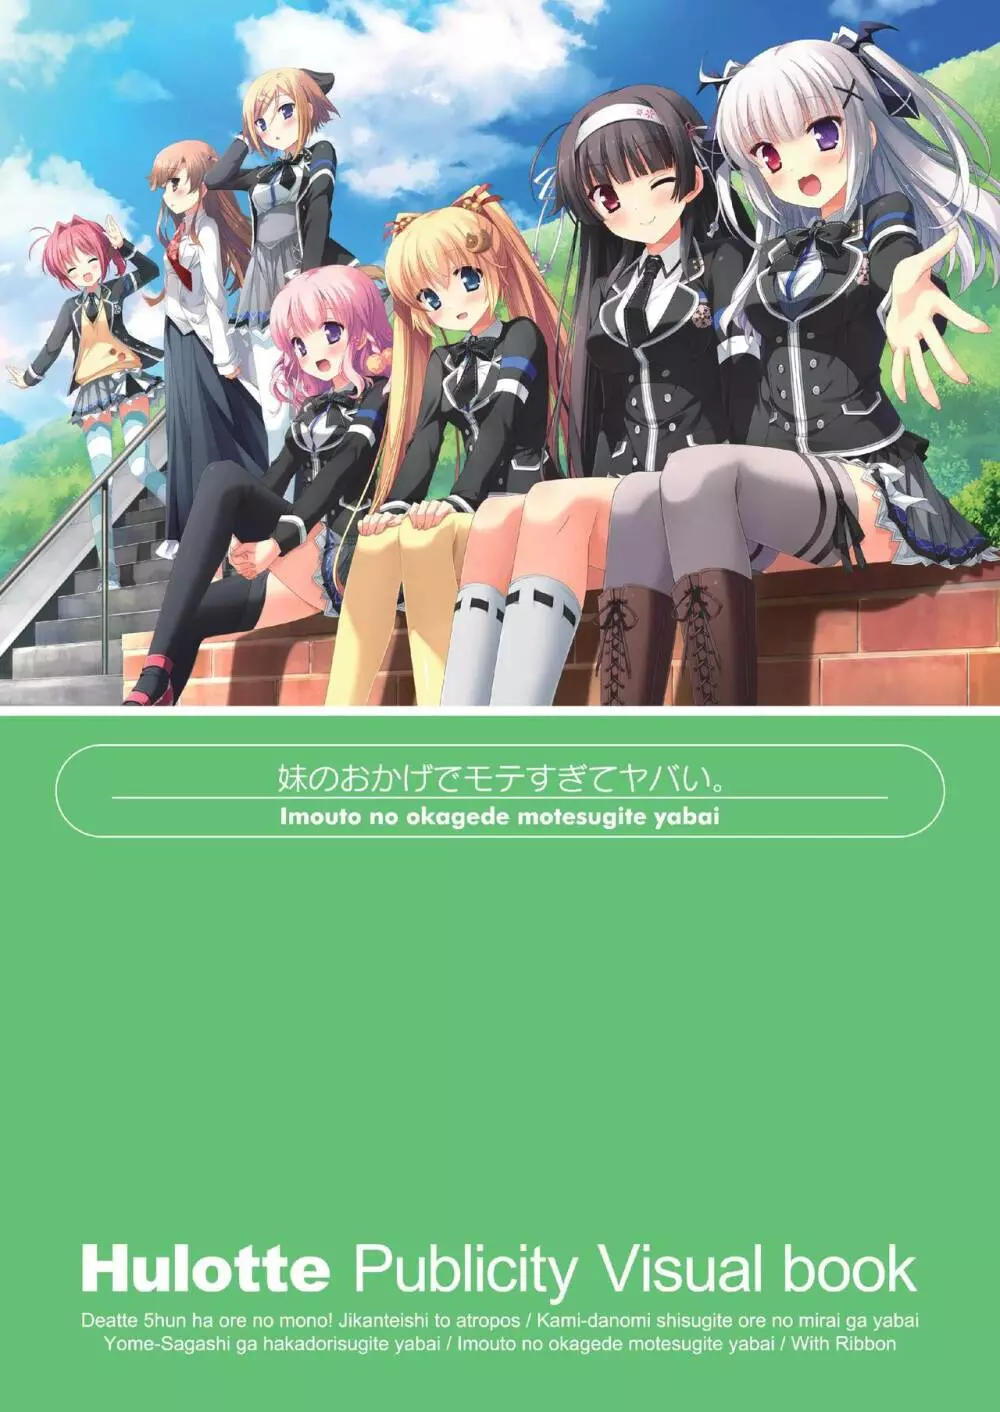 Hulotte Publicity Visual book 電子書籍版 49ページ